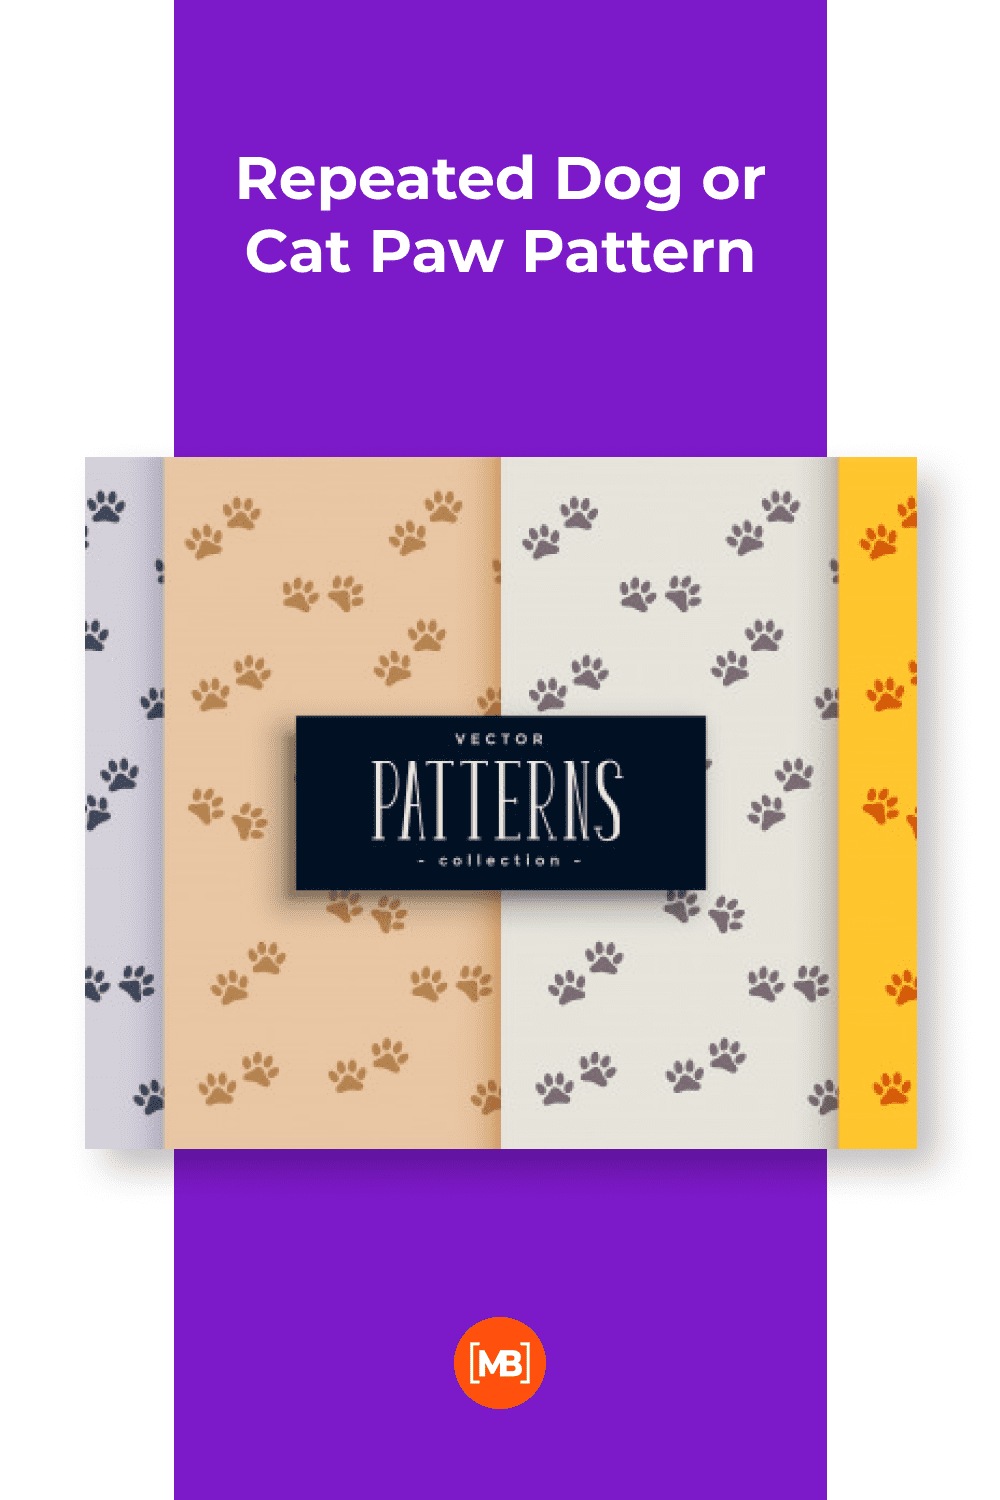 Repeated Dog or Cat Paw Pattern.